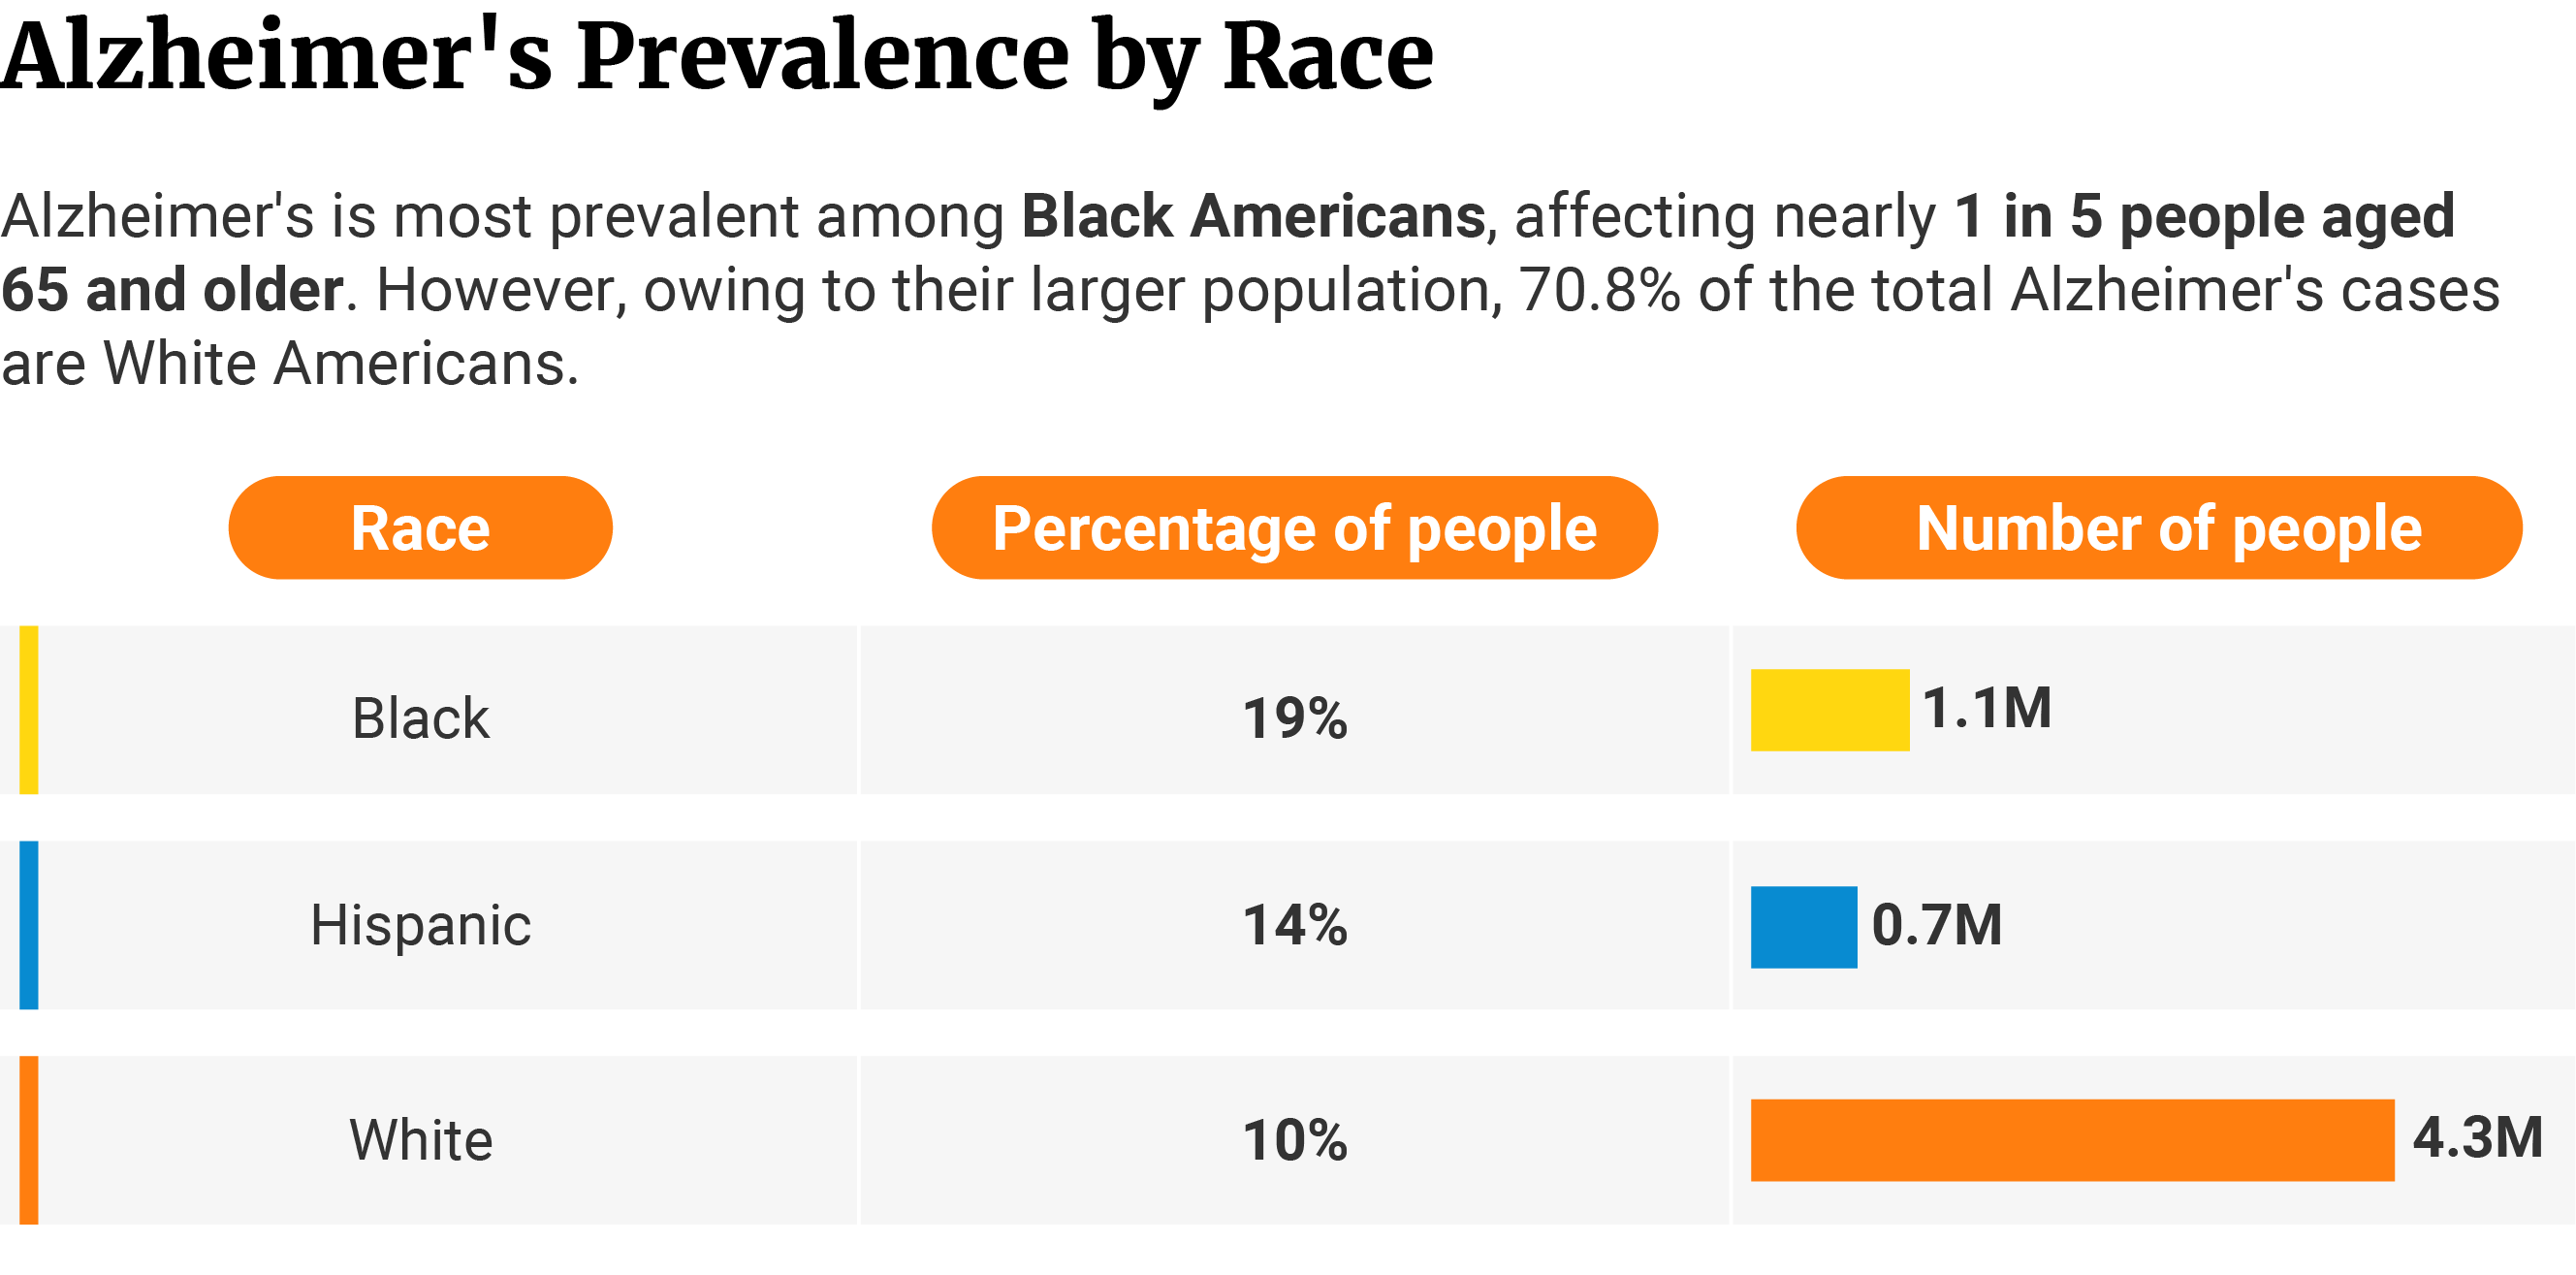 Table showing Alzheimer's rate is highest among Blacks at 19% (1.1 million) than Whites at 10%. Whites have a higher number of Alzheimer's cases at 4.3 million due to larger population.